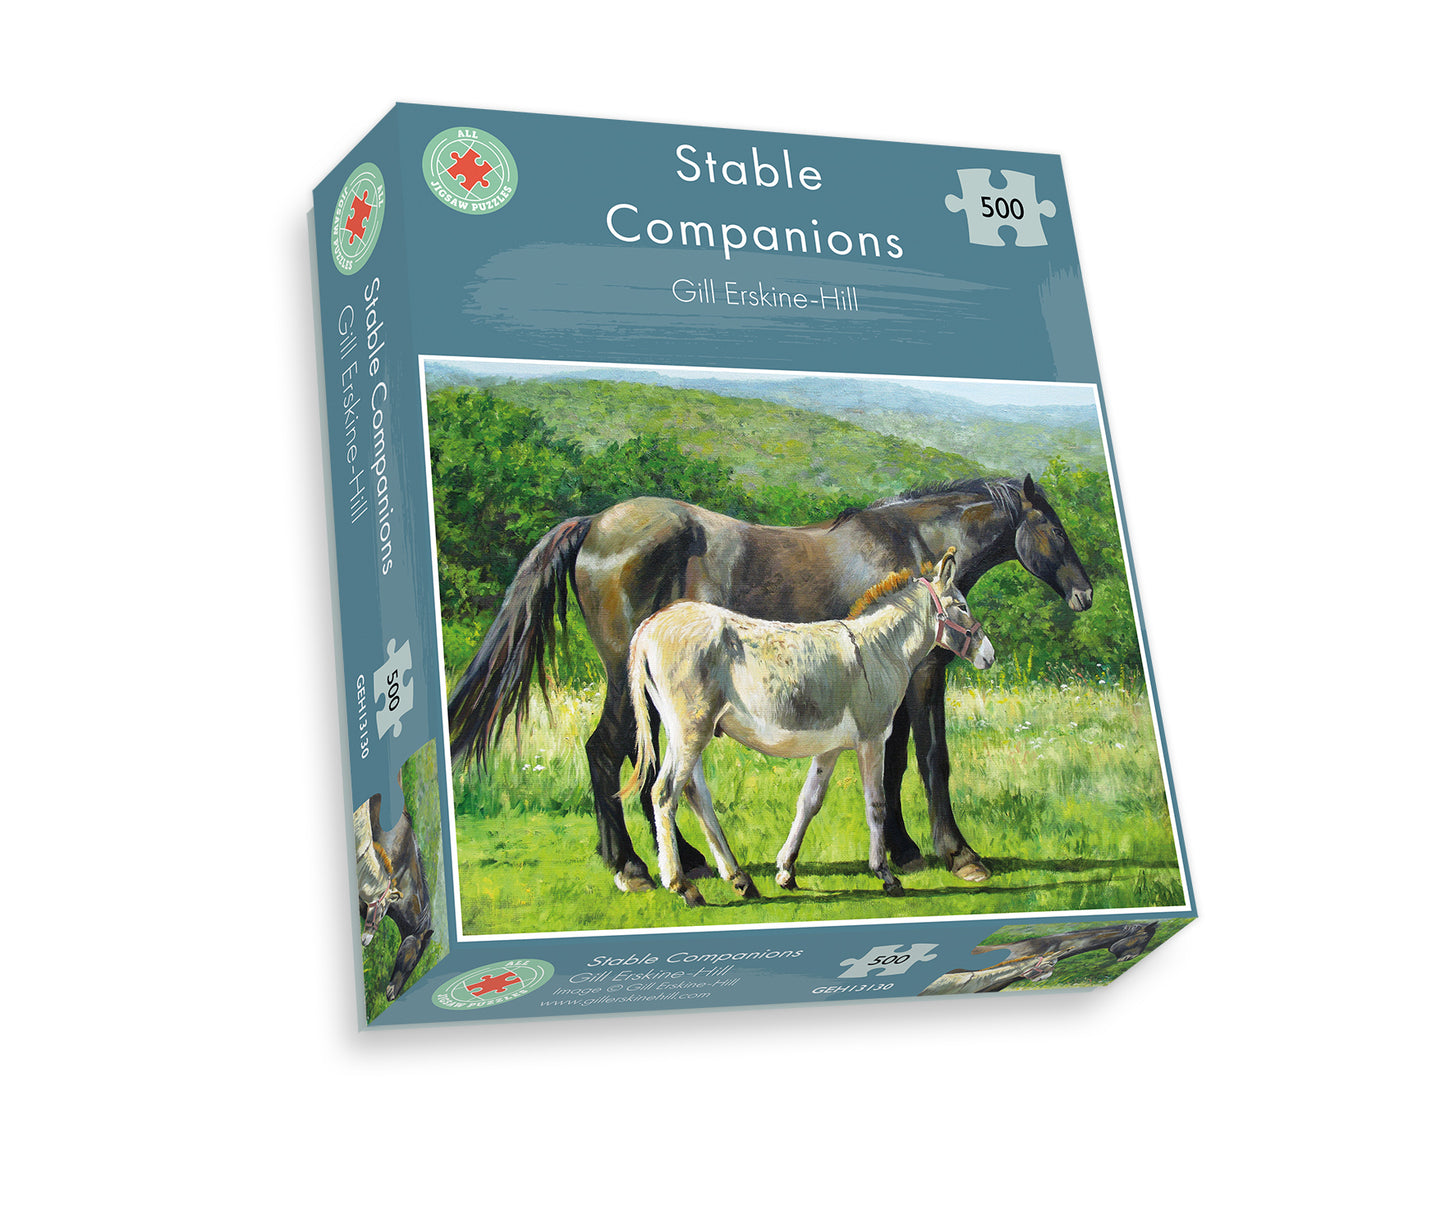 Stable Companions 1000 or 500 Piece Jigsaw Puzzle